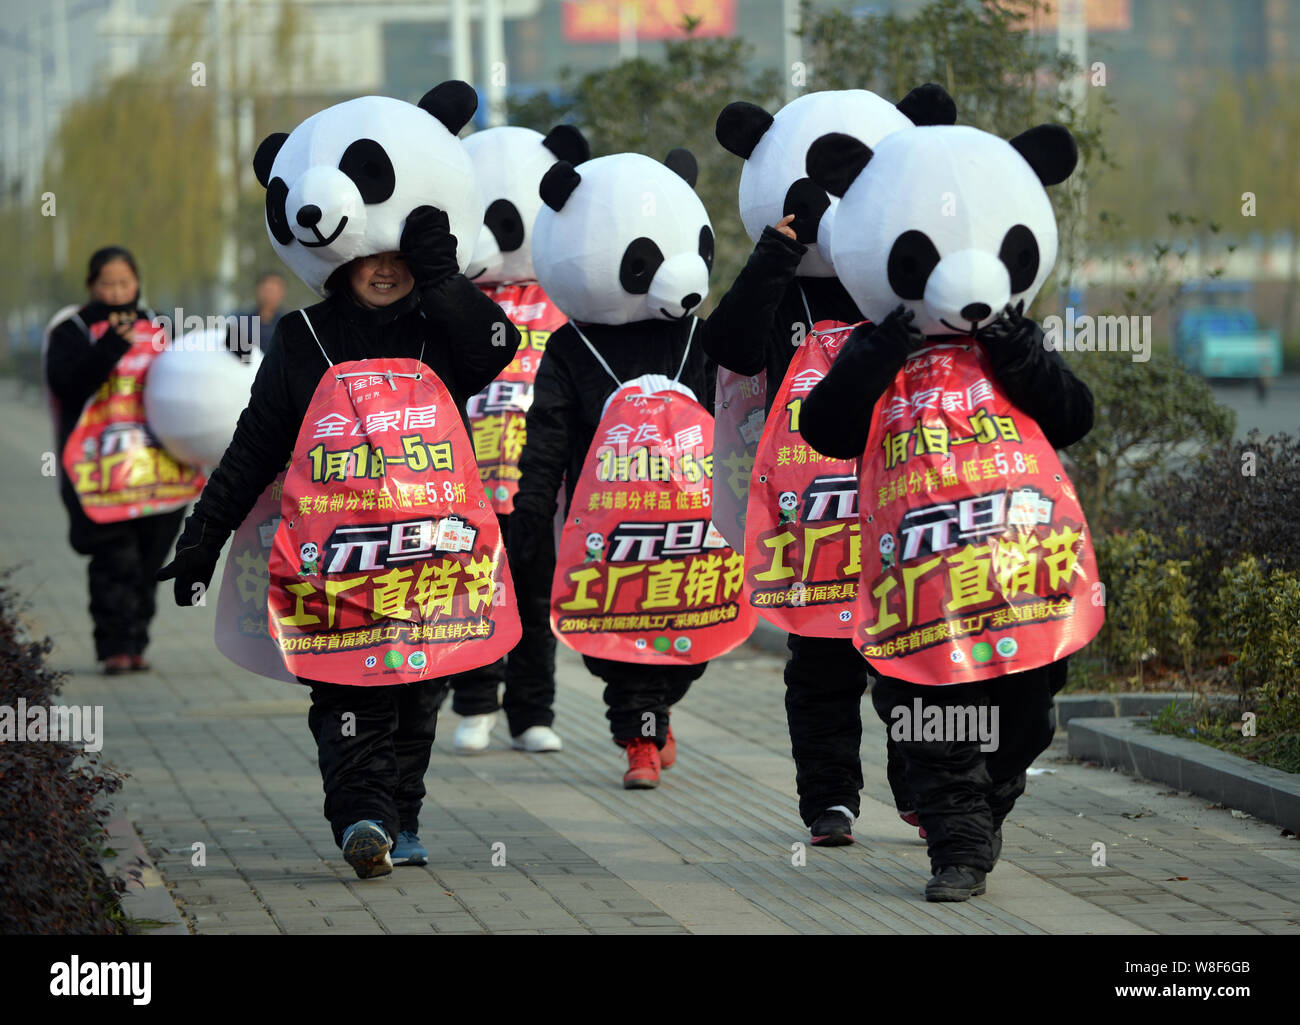 Chinese promoters of a merchant dressed in panda costumes in the street to welcome New Year in Xuancheng city, east China's Anhui province, 29 Decembe Stock Photo